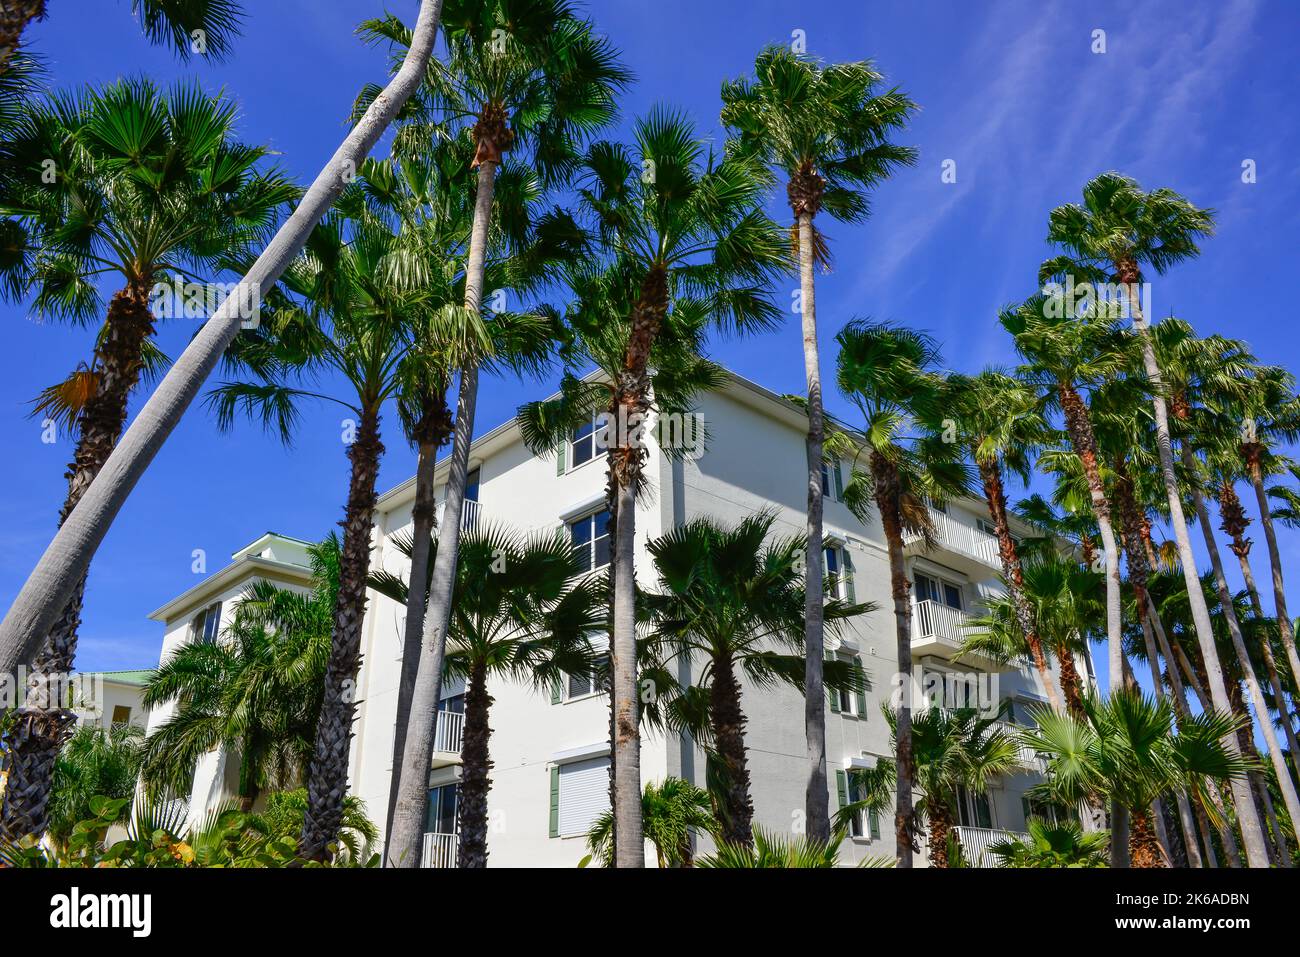 A modern condominium complex shrouded by Palm trees and coastal vegetation on the Peace river, in Punta Gorda, Florida, a retirement haven. Stock Photo